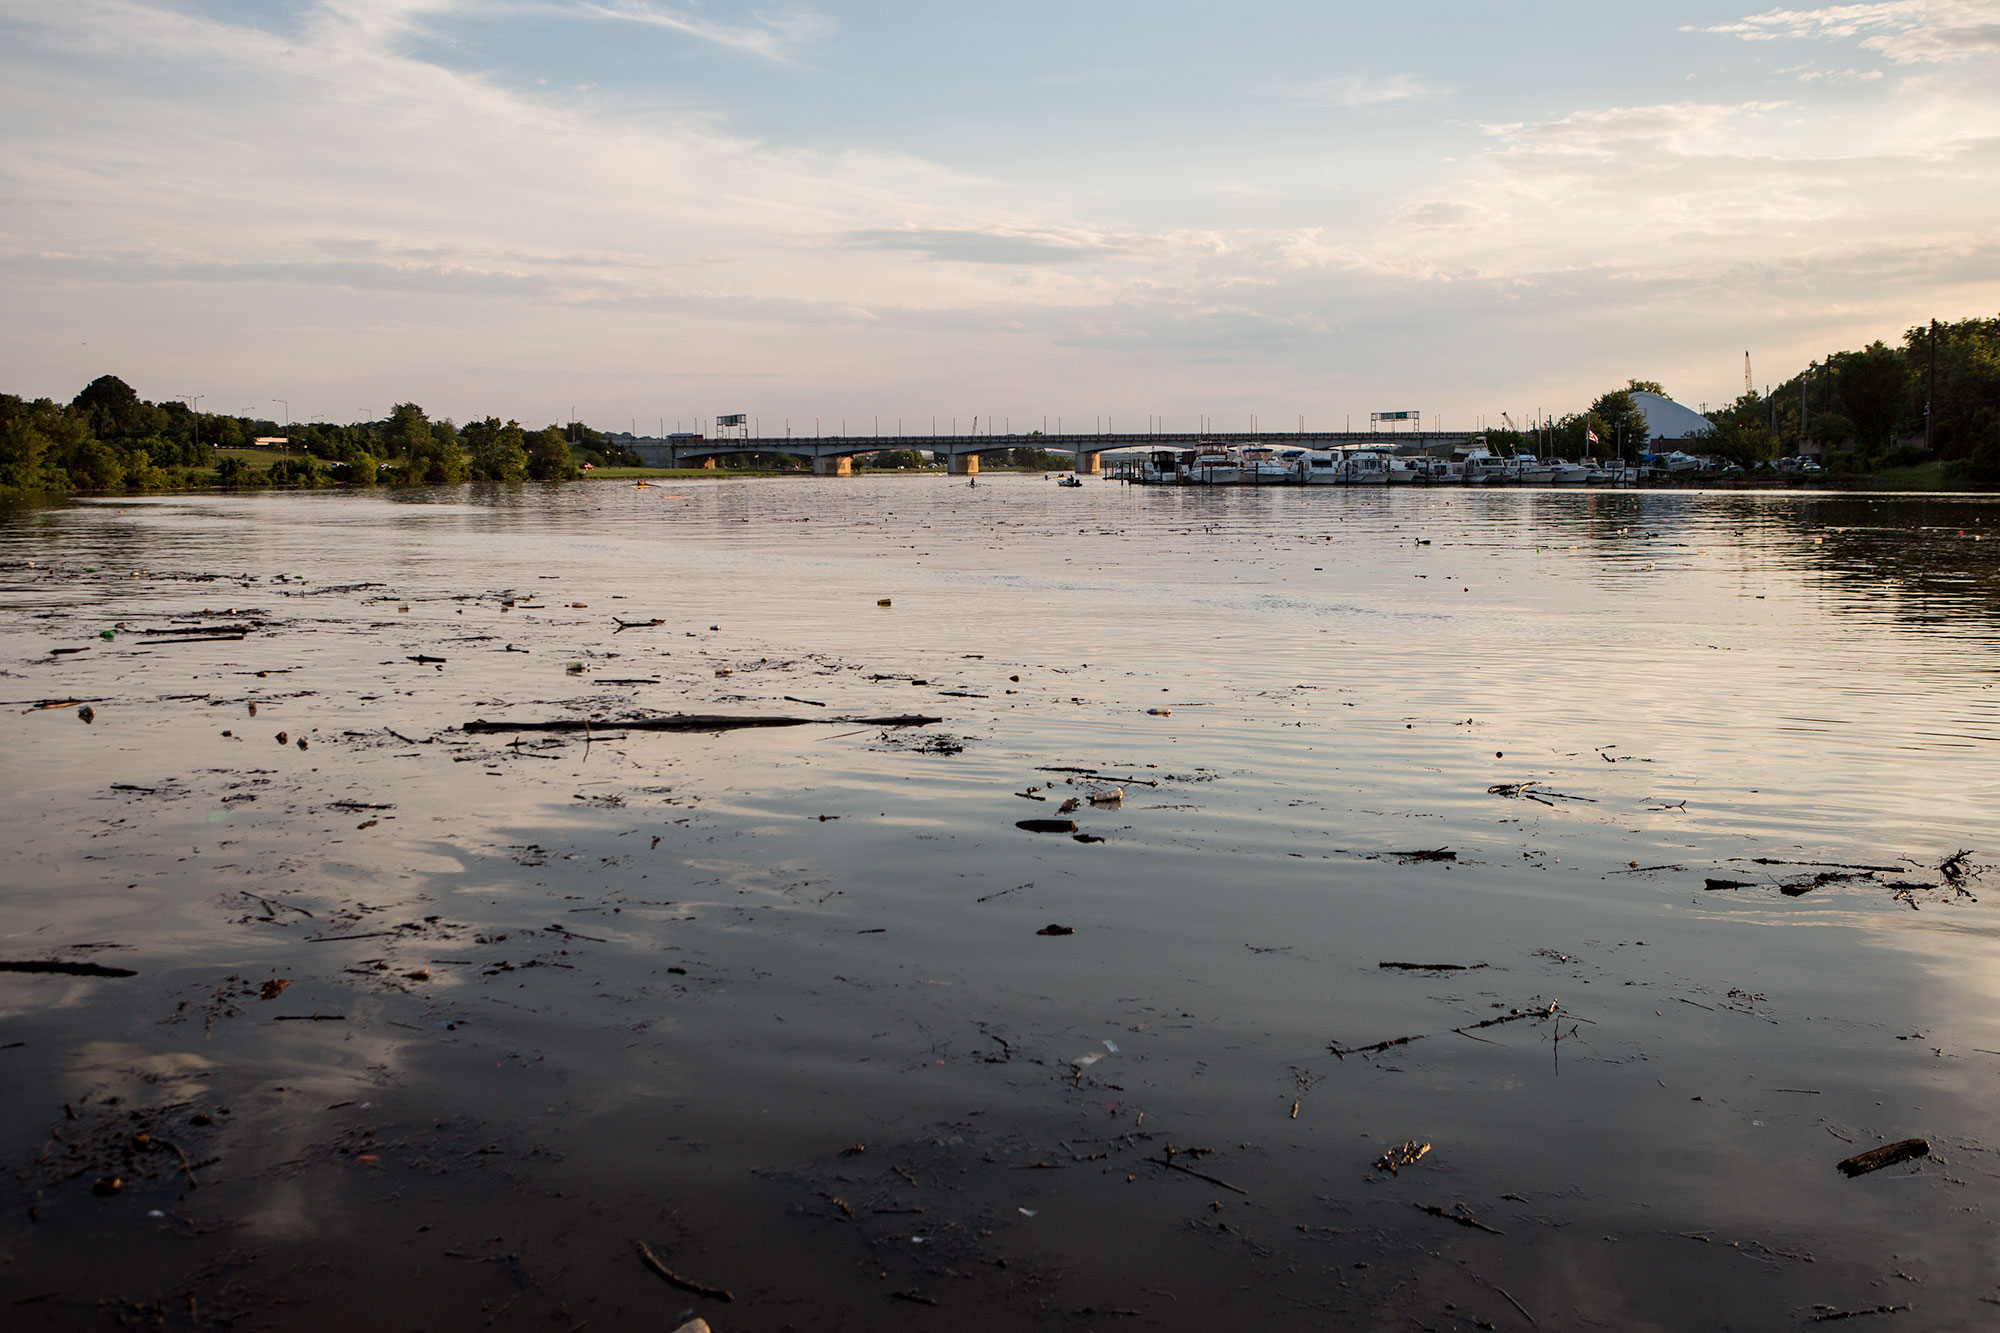  A quiet evening view of the Anacostia River in 2017 after a heavy rain, which stirred up debris in the river. The Seafarers clubhouse and the Pennsylvania Avenue bridge appear in the distance. 